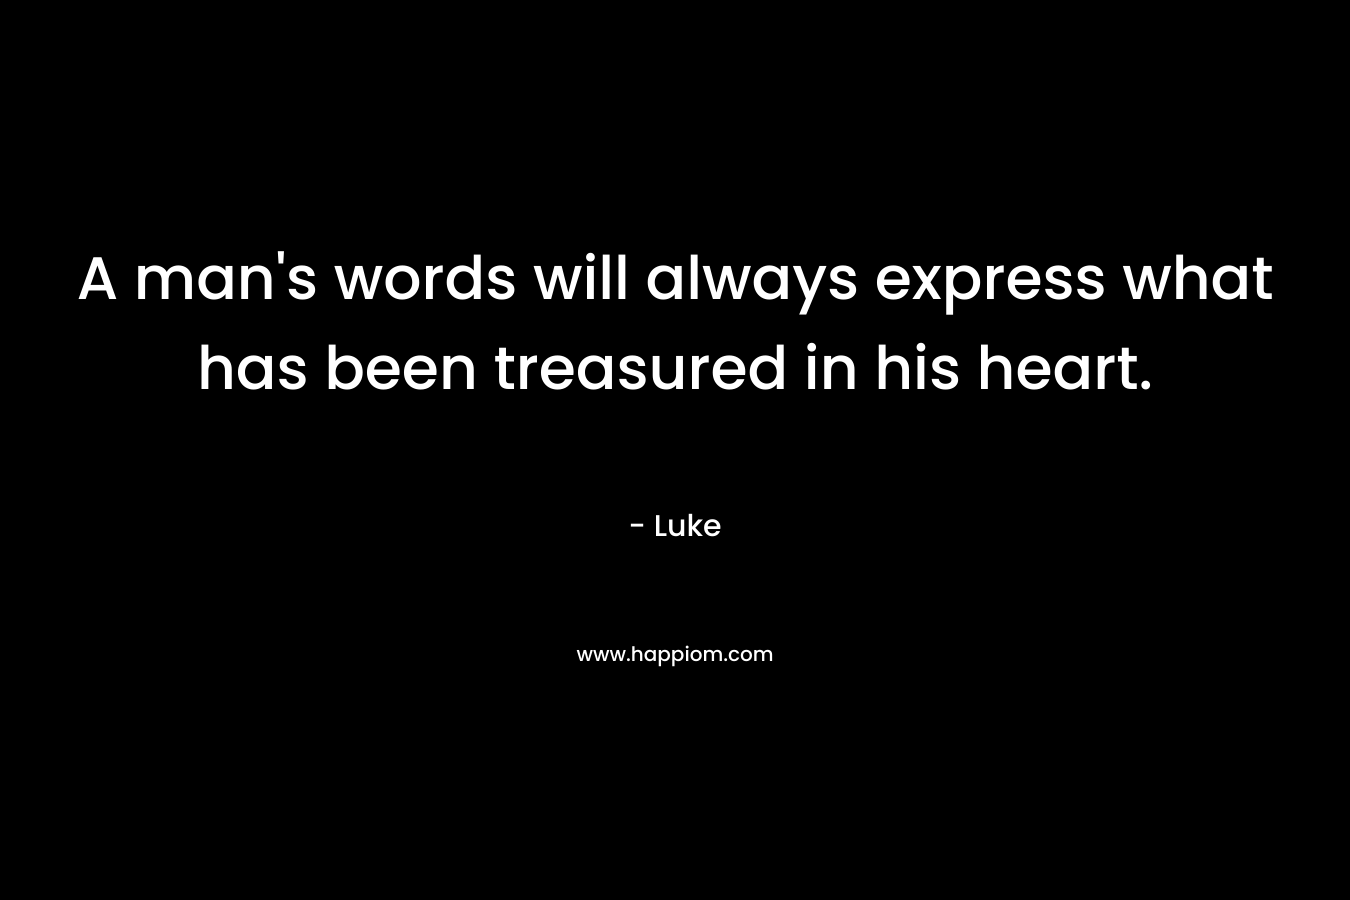 A man's words will always express what has been treasured in his heart.